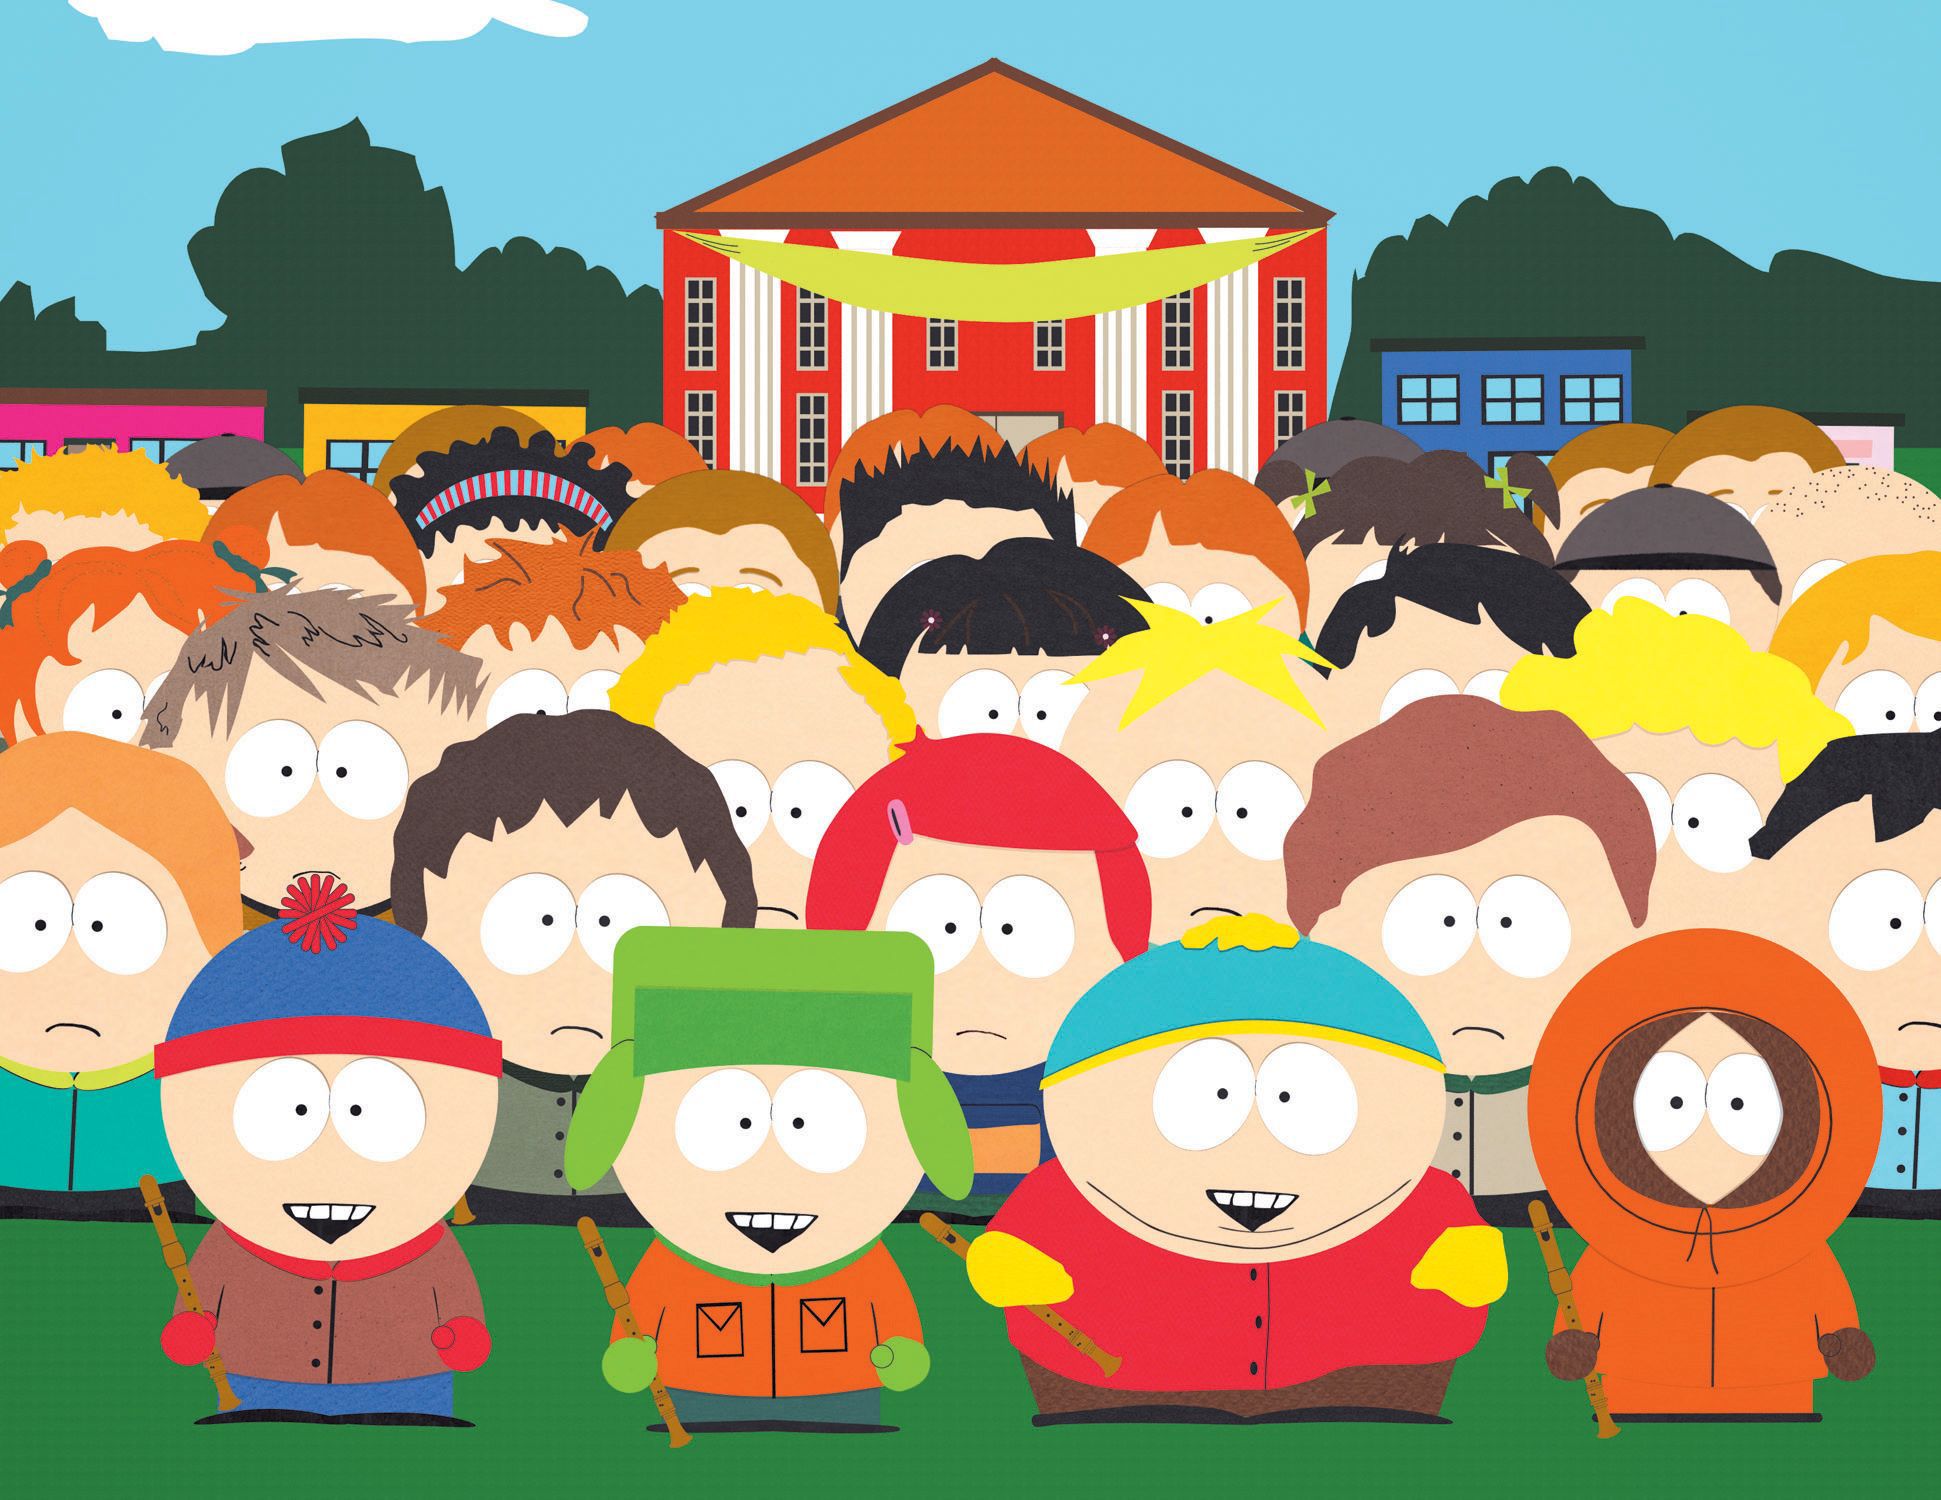 Trey Parker and Matt Stone Are Making $900 Million Worth of 'South Park